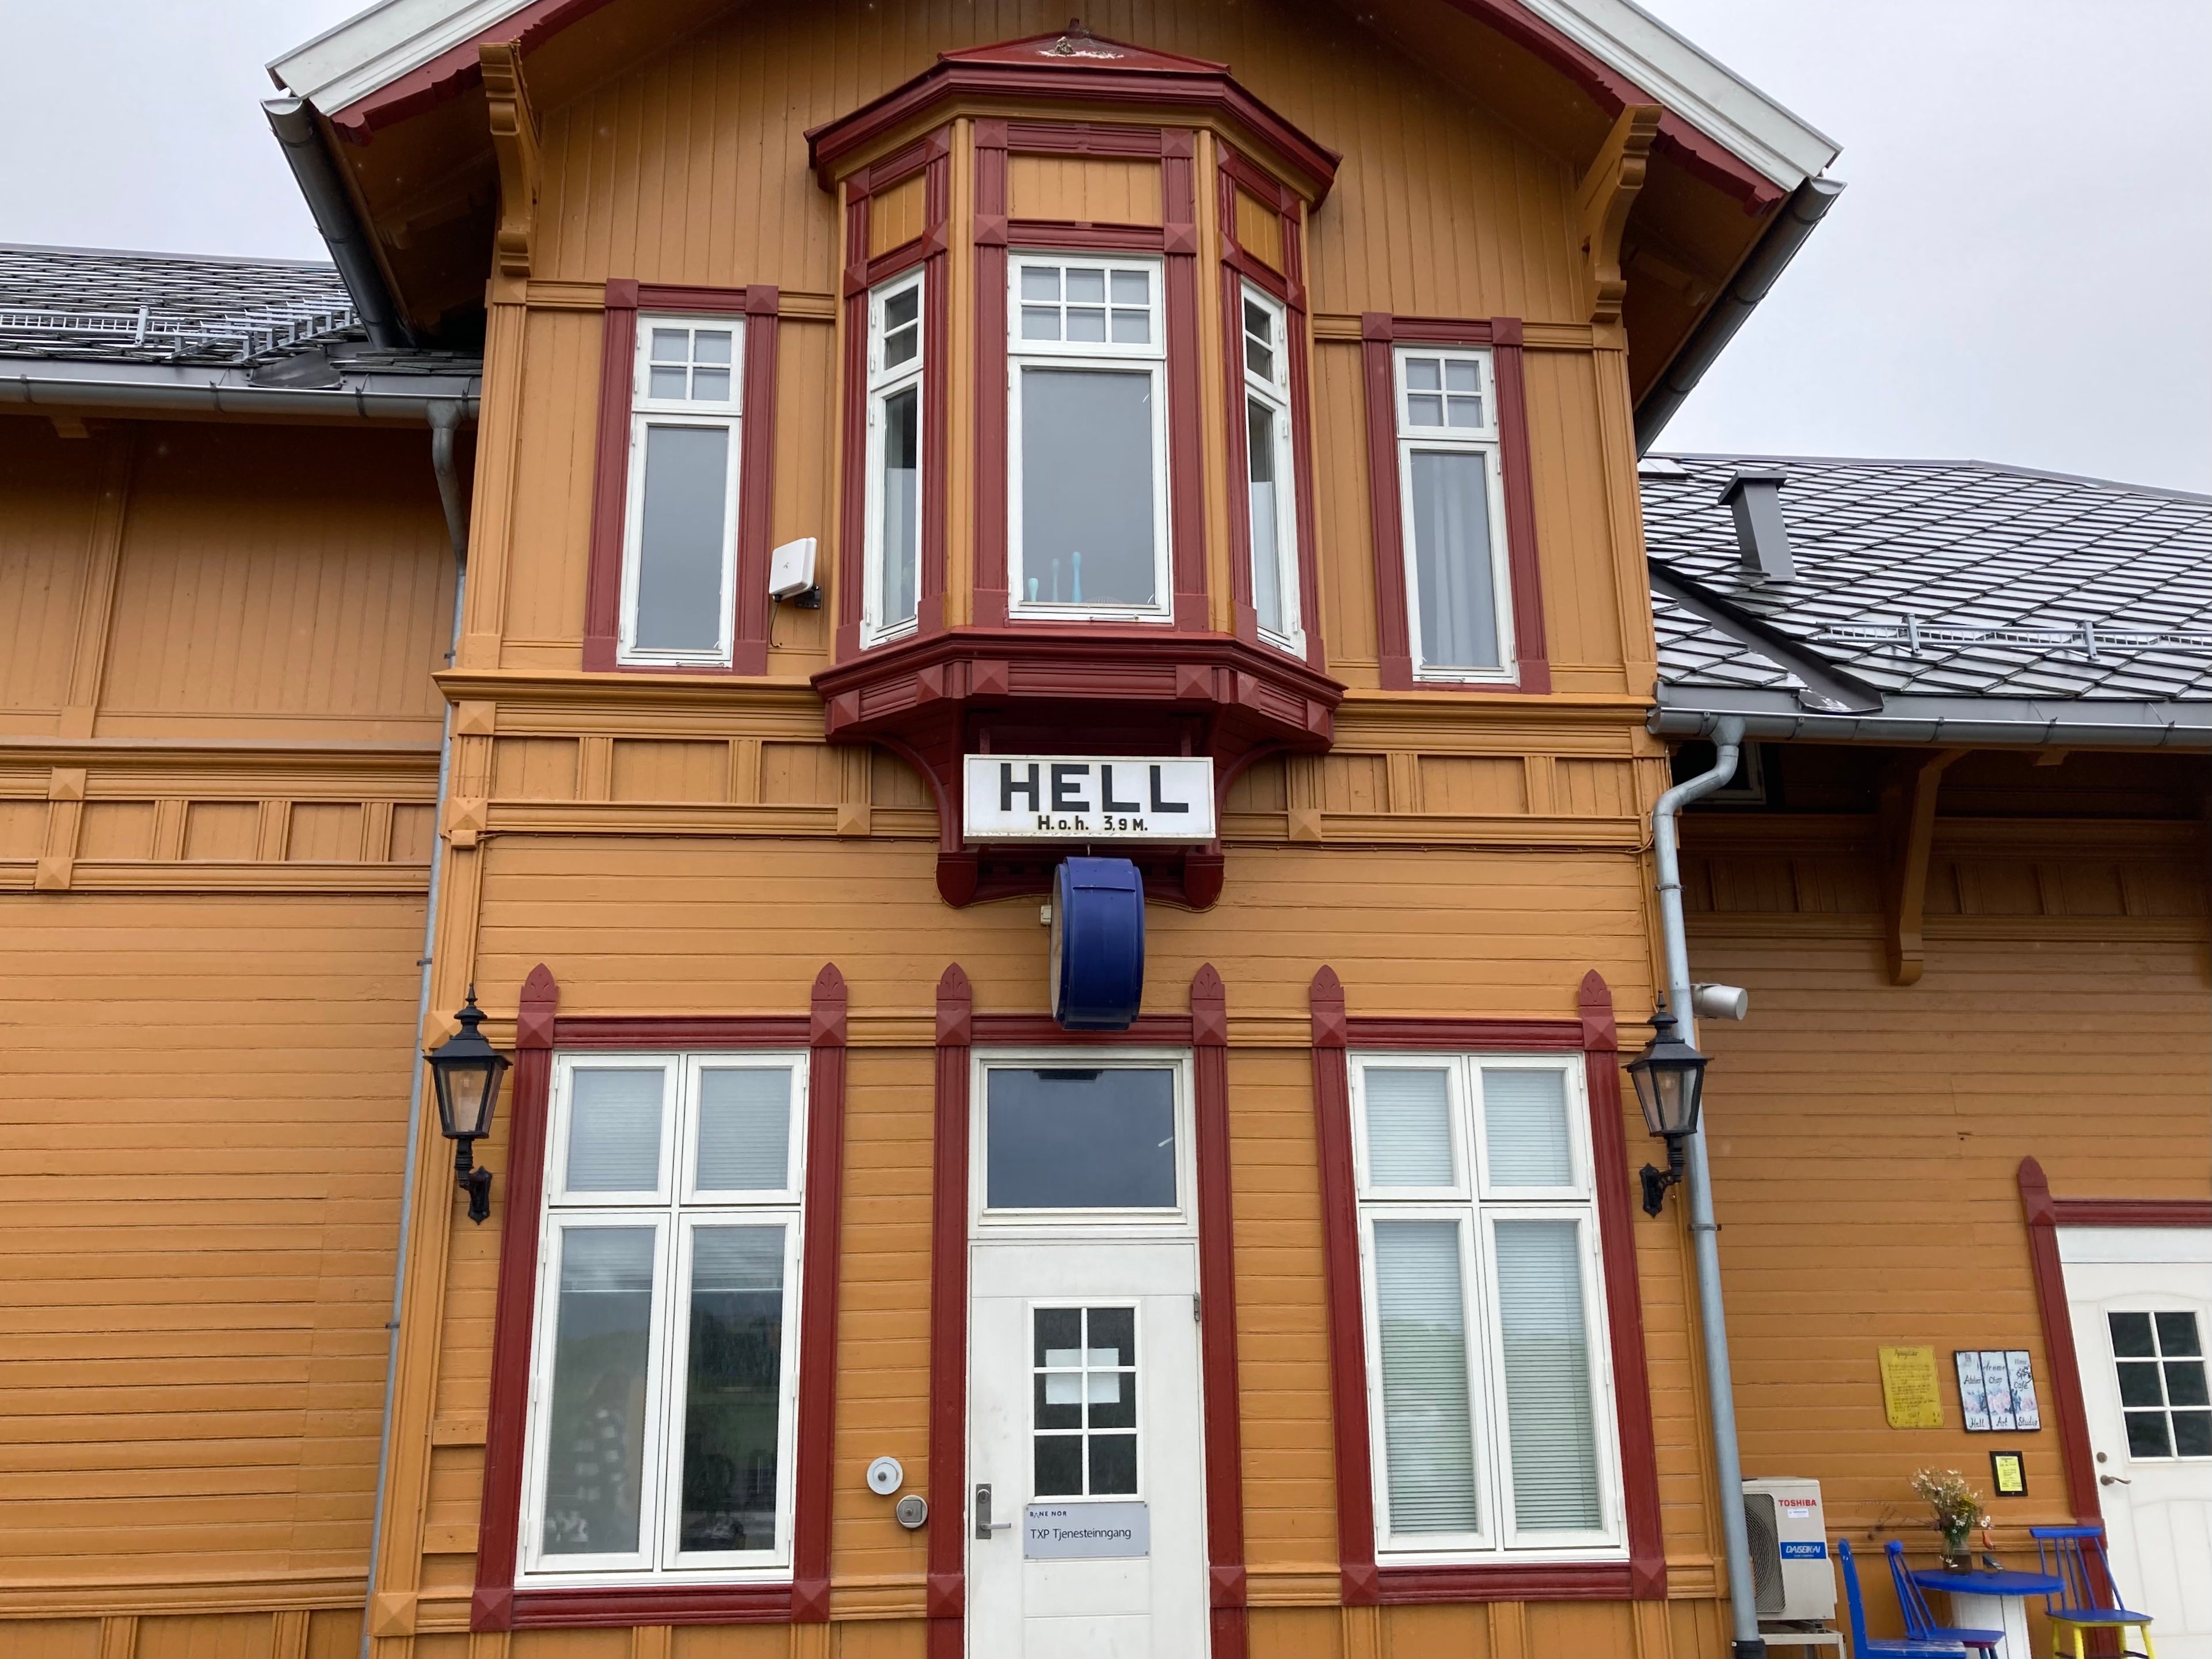 Hell’s charming railway station, located across the Stjørdalselva river from Trondheim airport